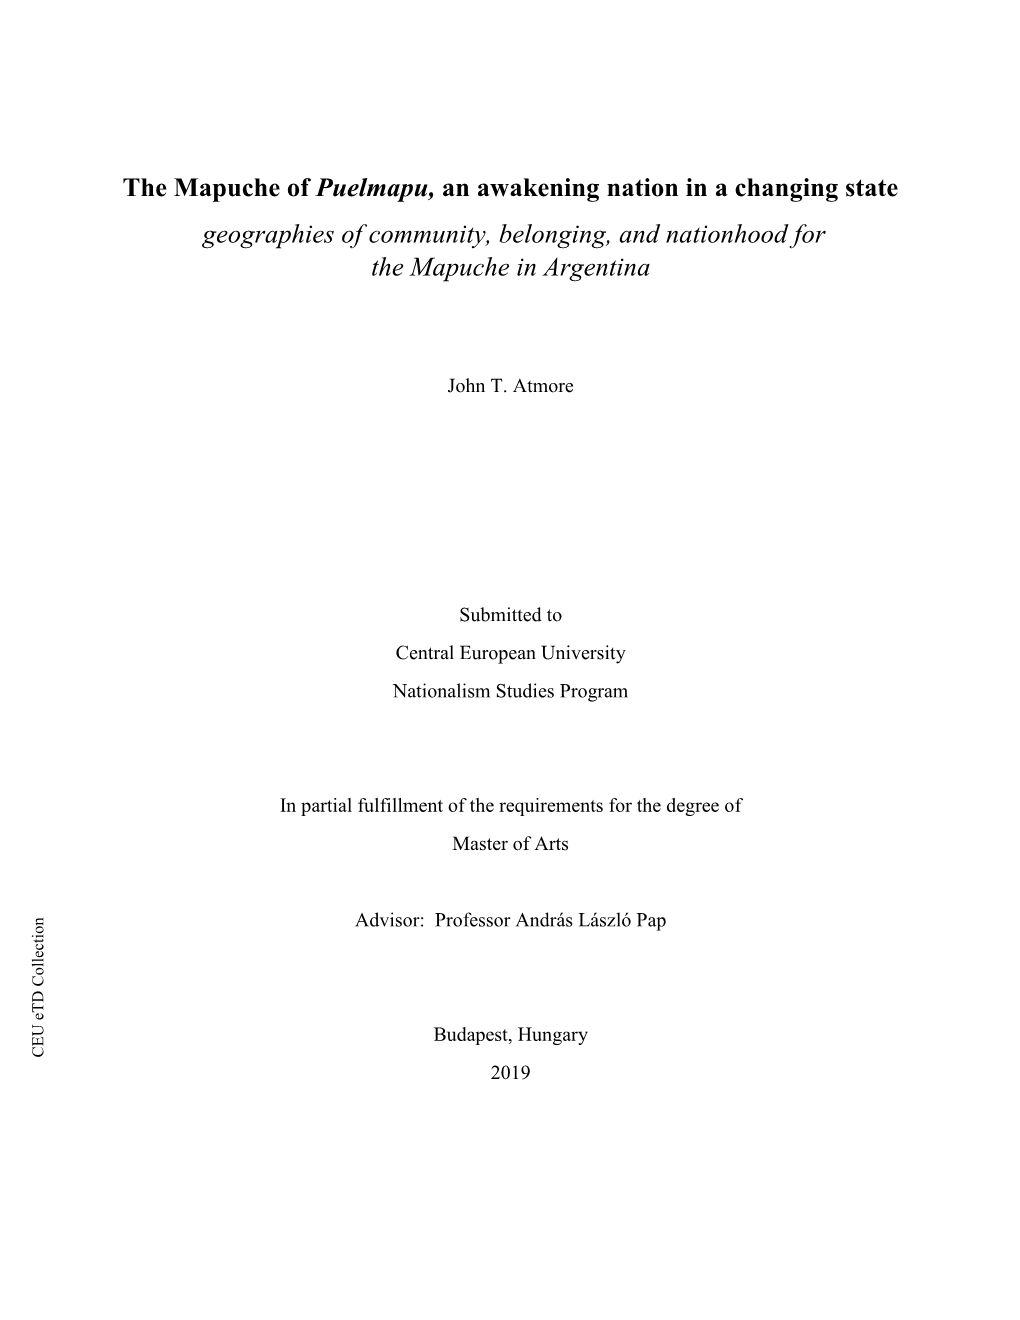 The Mapuche of Puelmapu, an Awakening Nation in a Changing State Geographies of Community, Belonging, and Nationhood for the Mapuche in Argentina